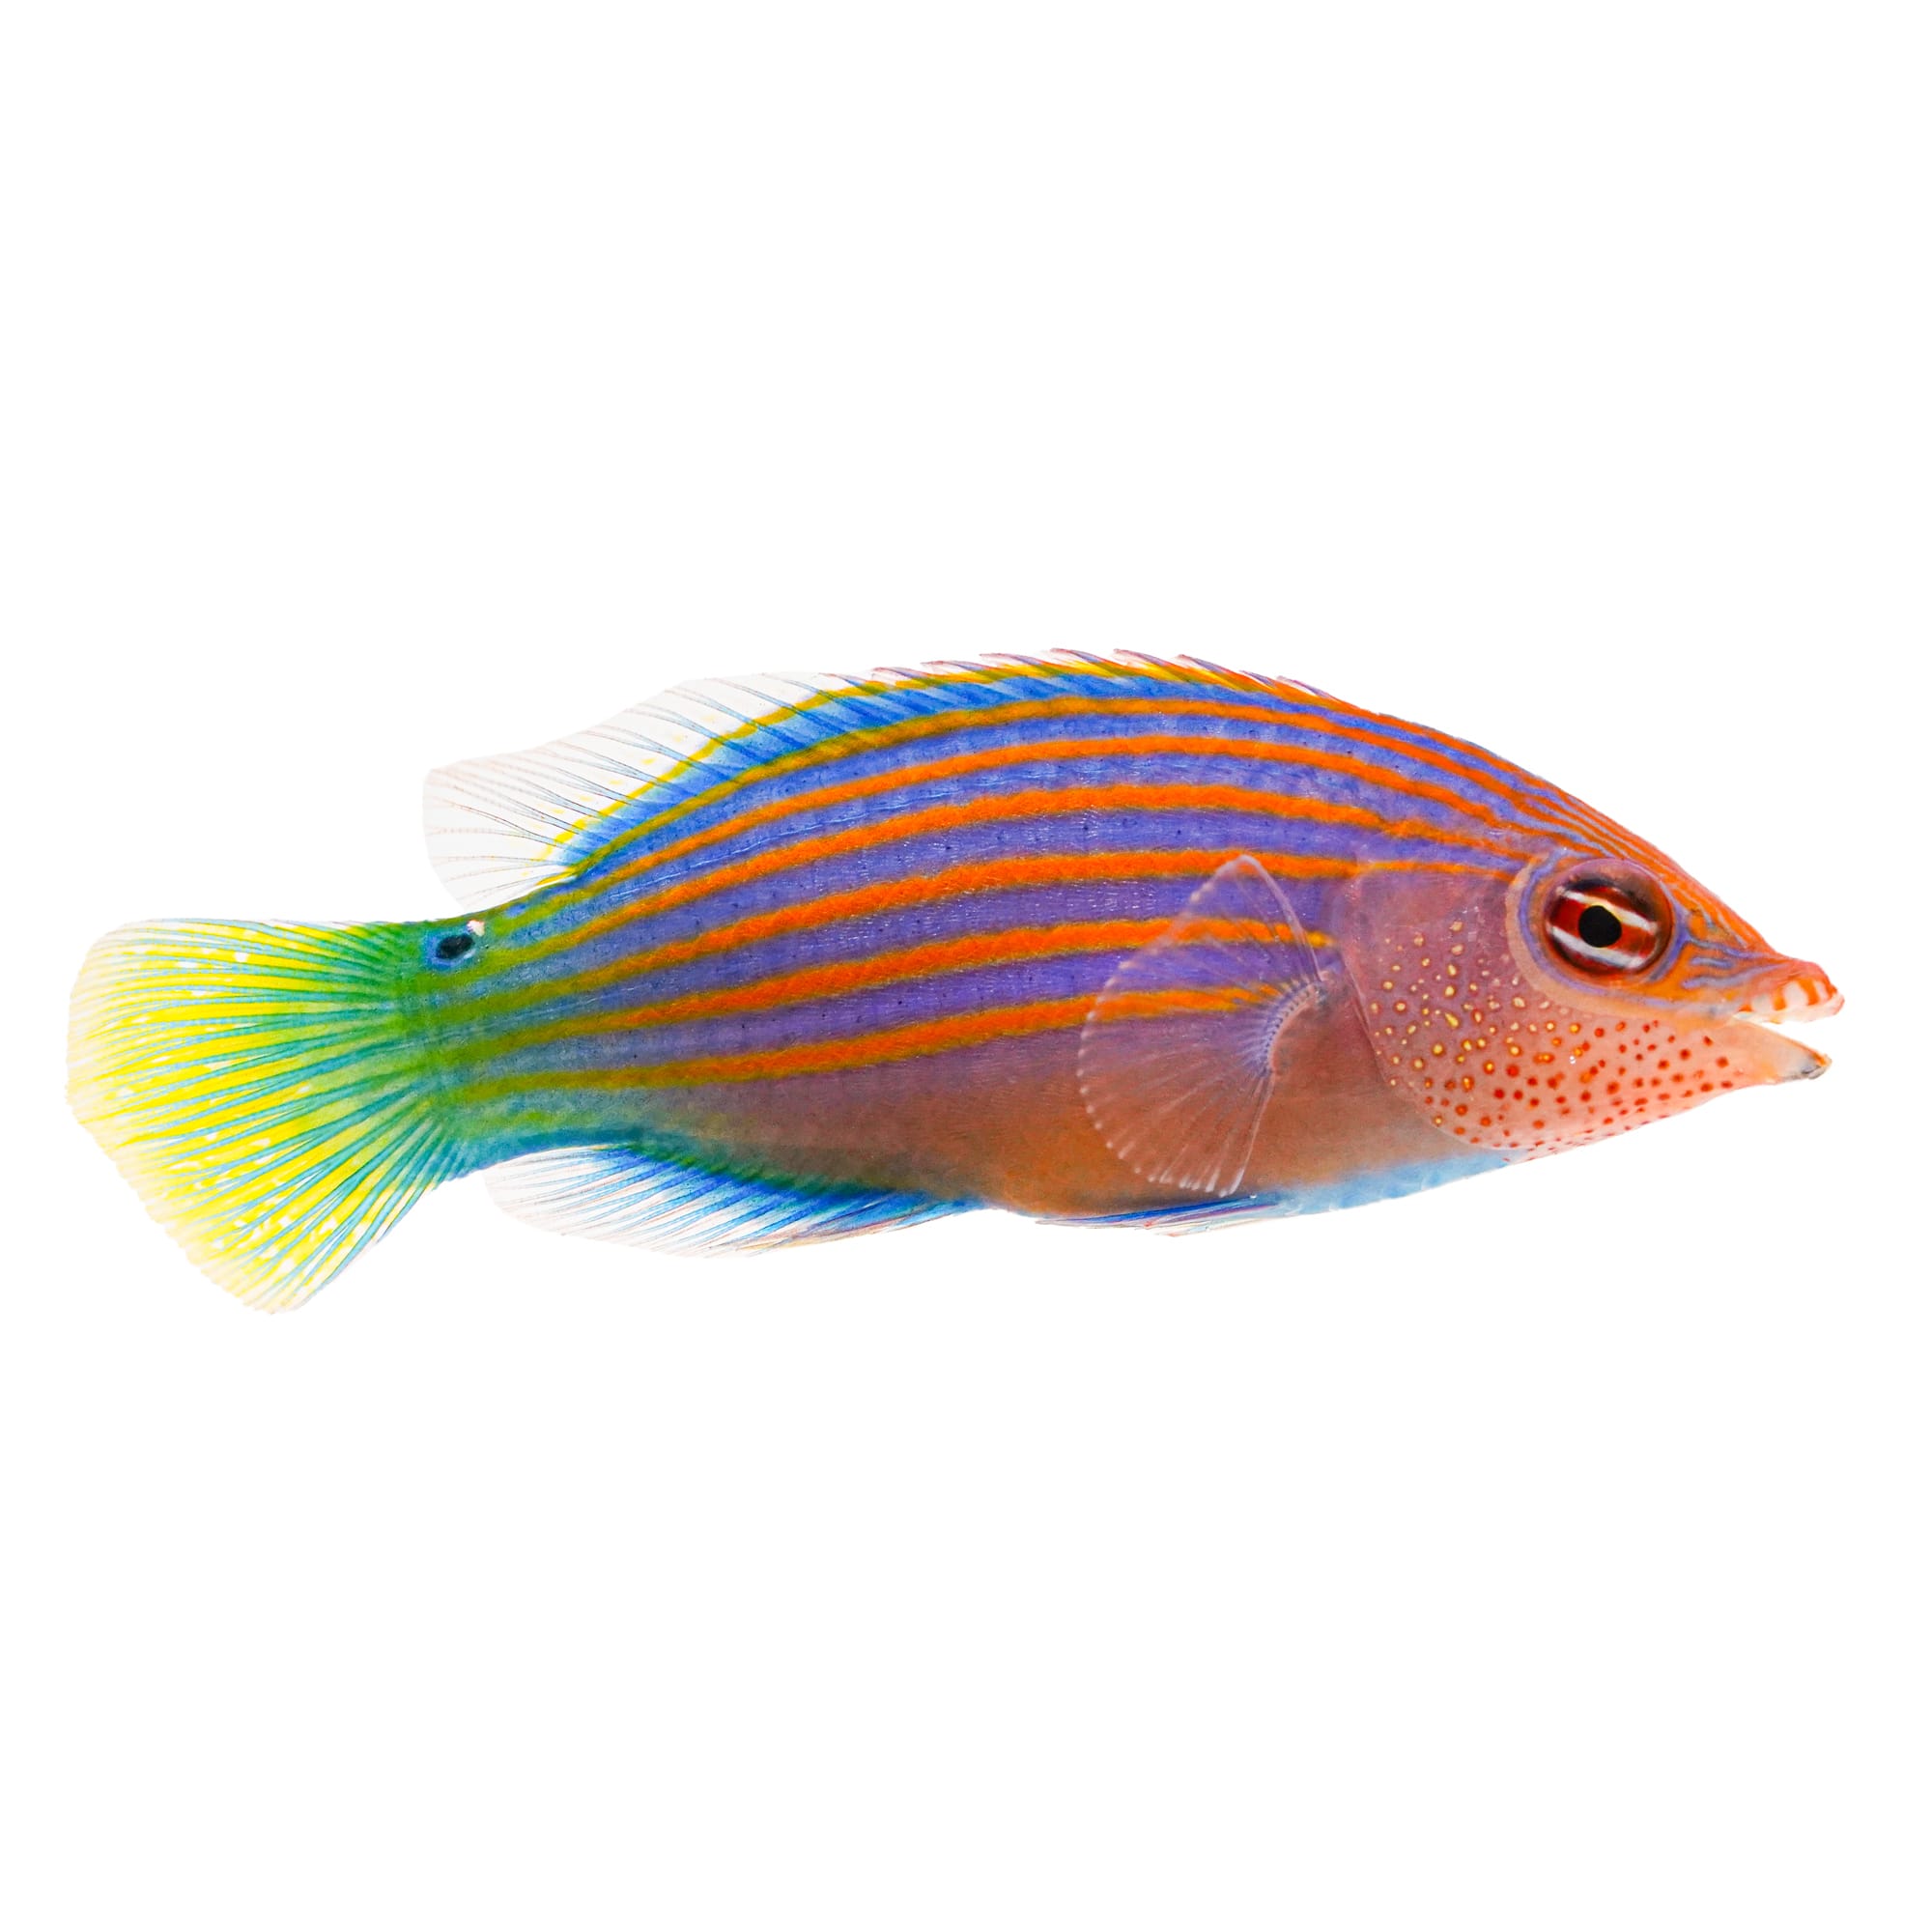 Six Line Wrasse For Sale